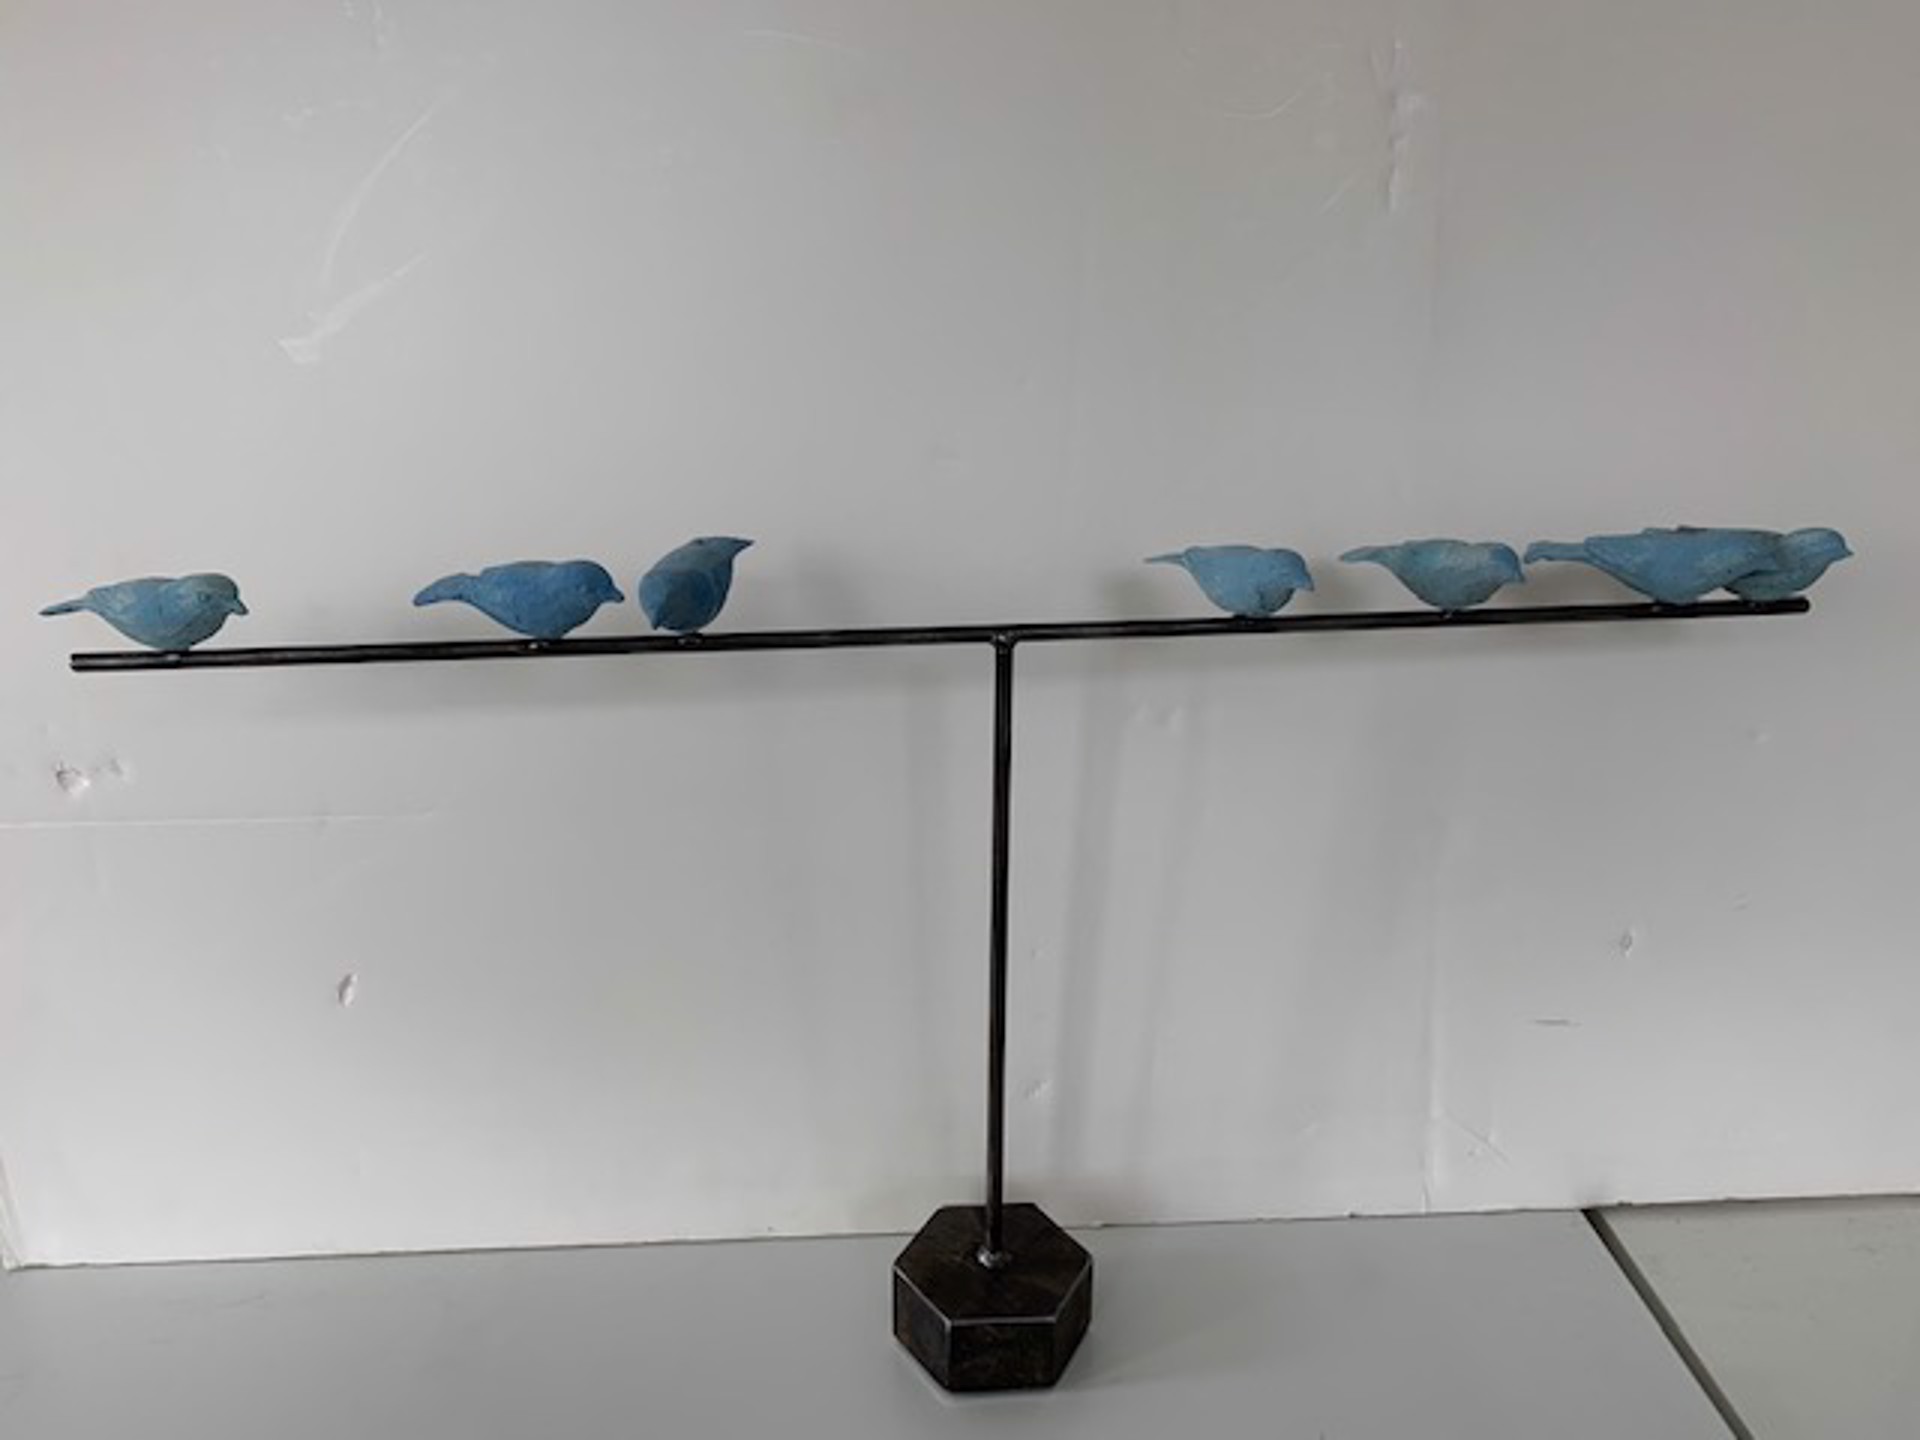 SOLD - 7 Birds on a Stand by Rory Burke